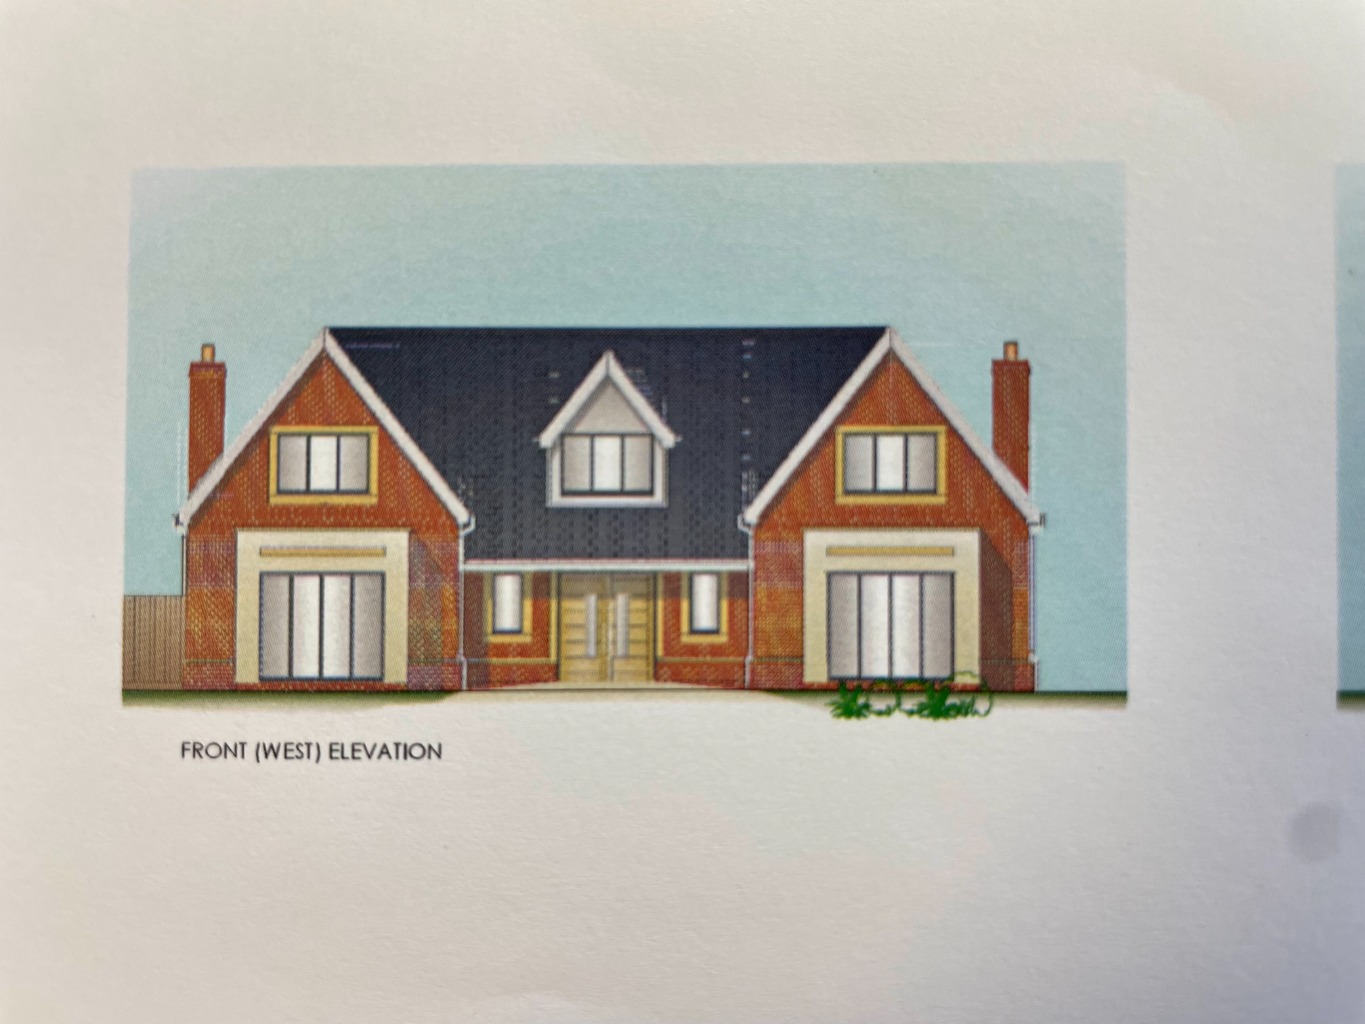 4 bed plot for sale in Potton Road, St. Neots  - Property Image 1